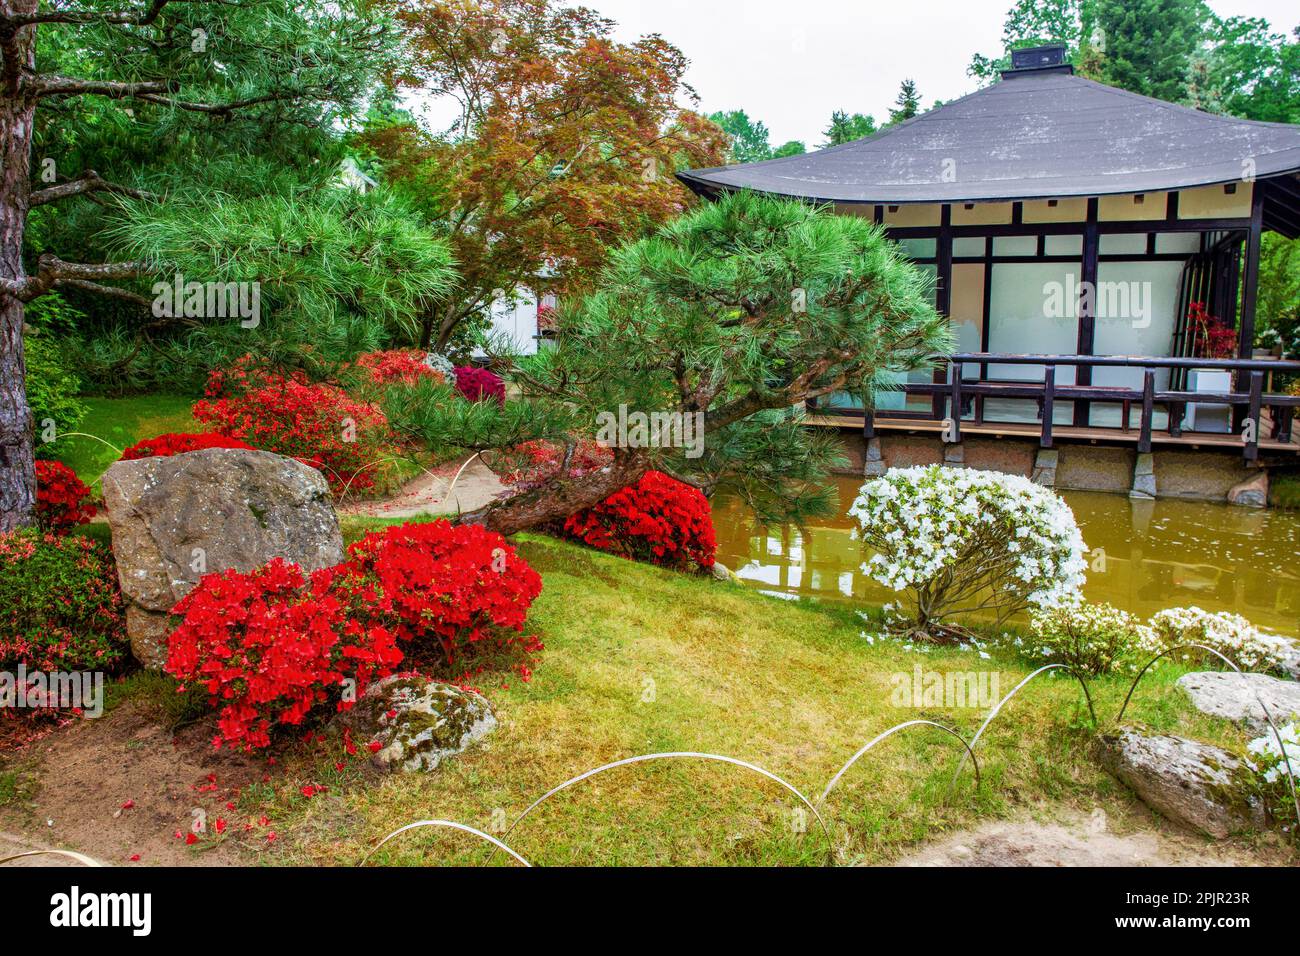 Amazing ball of flowering rhododendron bonsai trees  in   Japanese garden  in Potsdam   (Bonsai Japanese garden)   and house in pagoda shape  in Brand Stock Photo